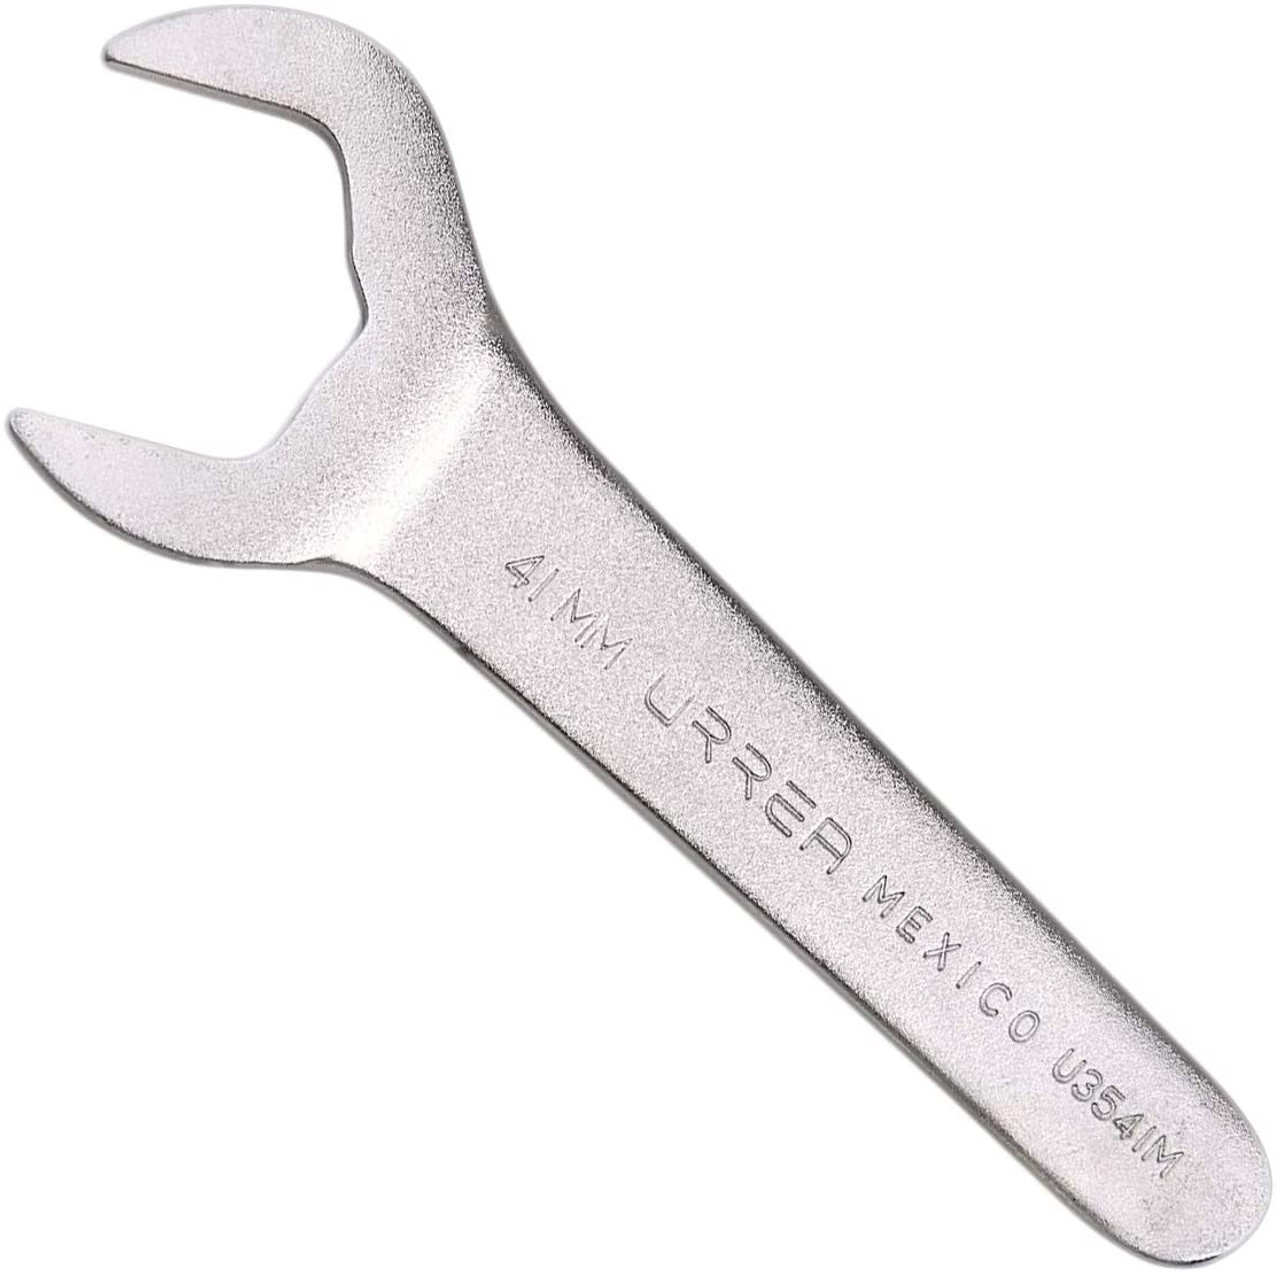 Satin Finish Service wrench, Size: 3/4, Total Length: 6-5/8"